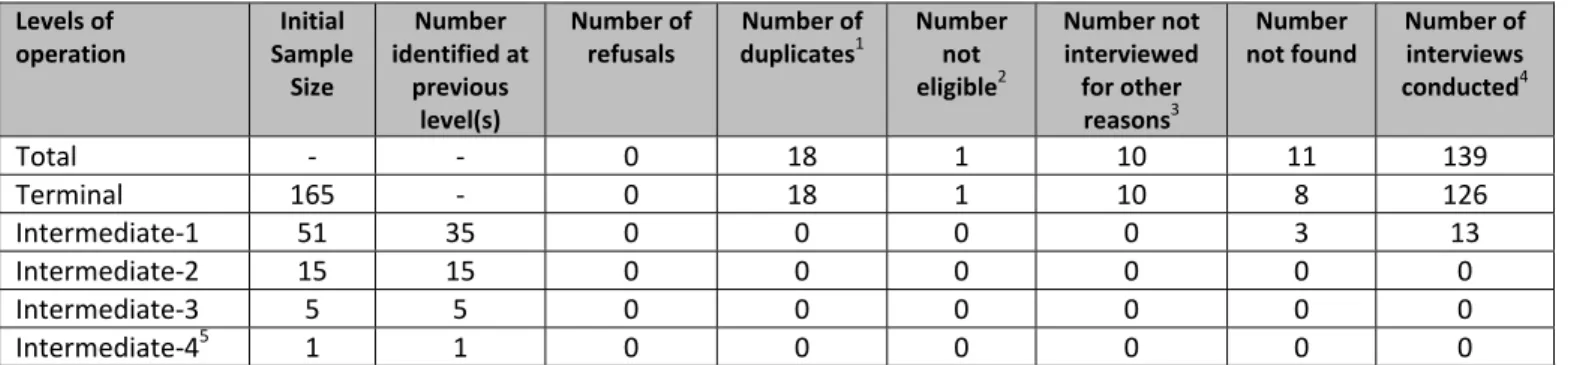 Table 4.1: Overview of the wholesalers sampled and interviewed  Levels of   operation  Initial  Sample  Size  Number  identified at previous  level(s)  Number of refusals  Number of duplicates1  Number not eligible2  Number not interviewed for other reason